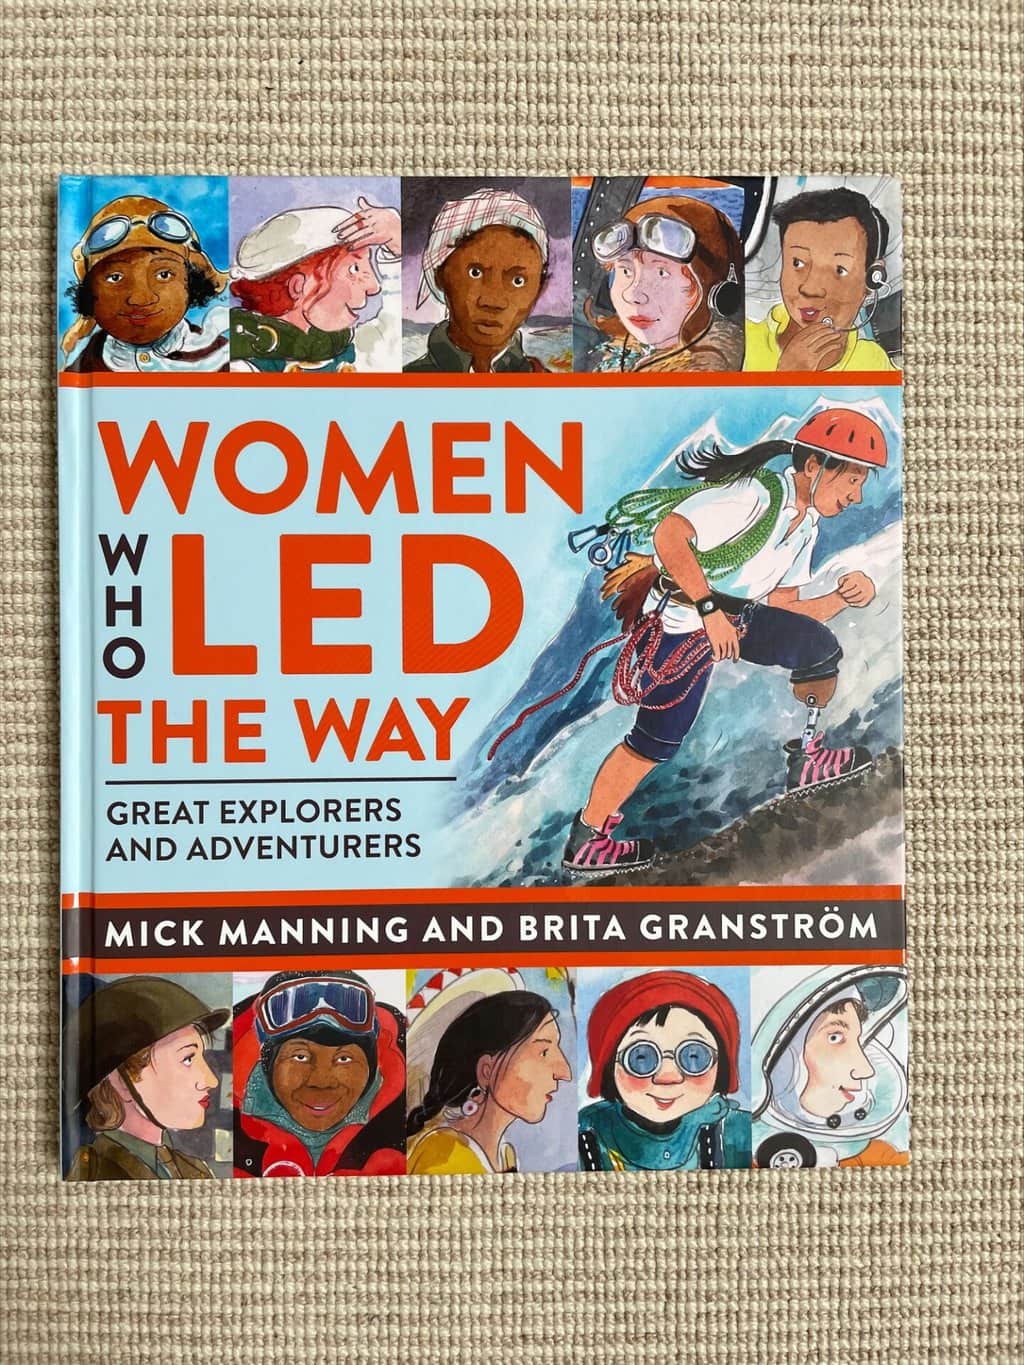 Women who Led the Way